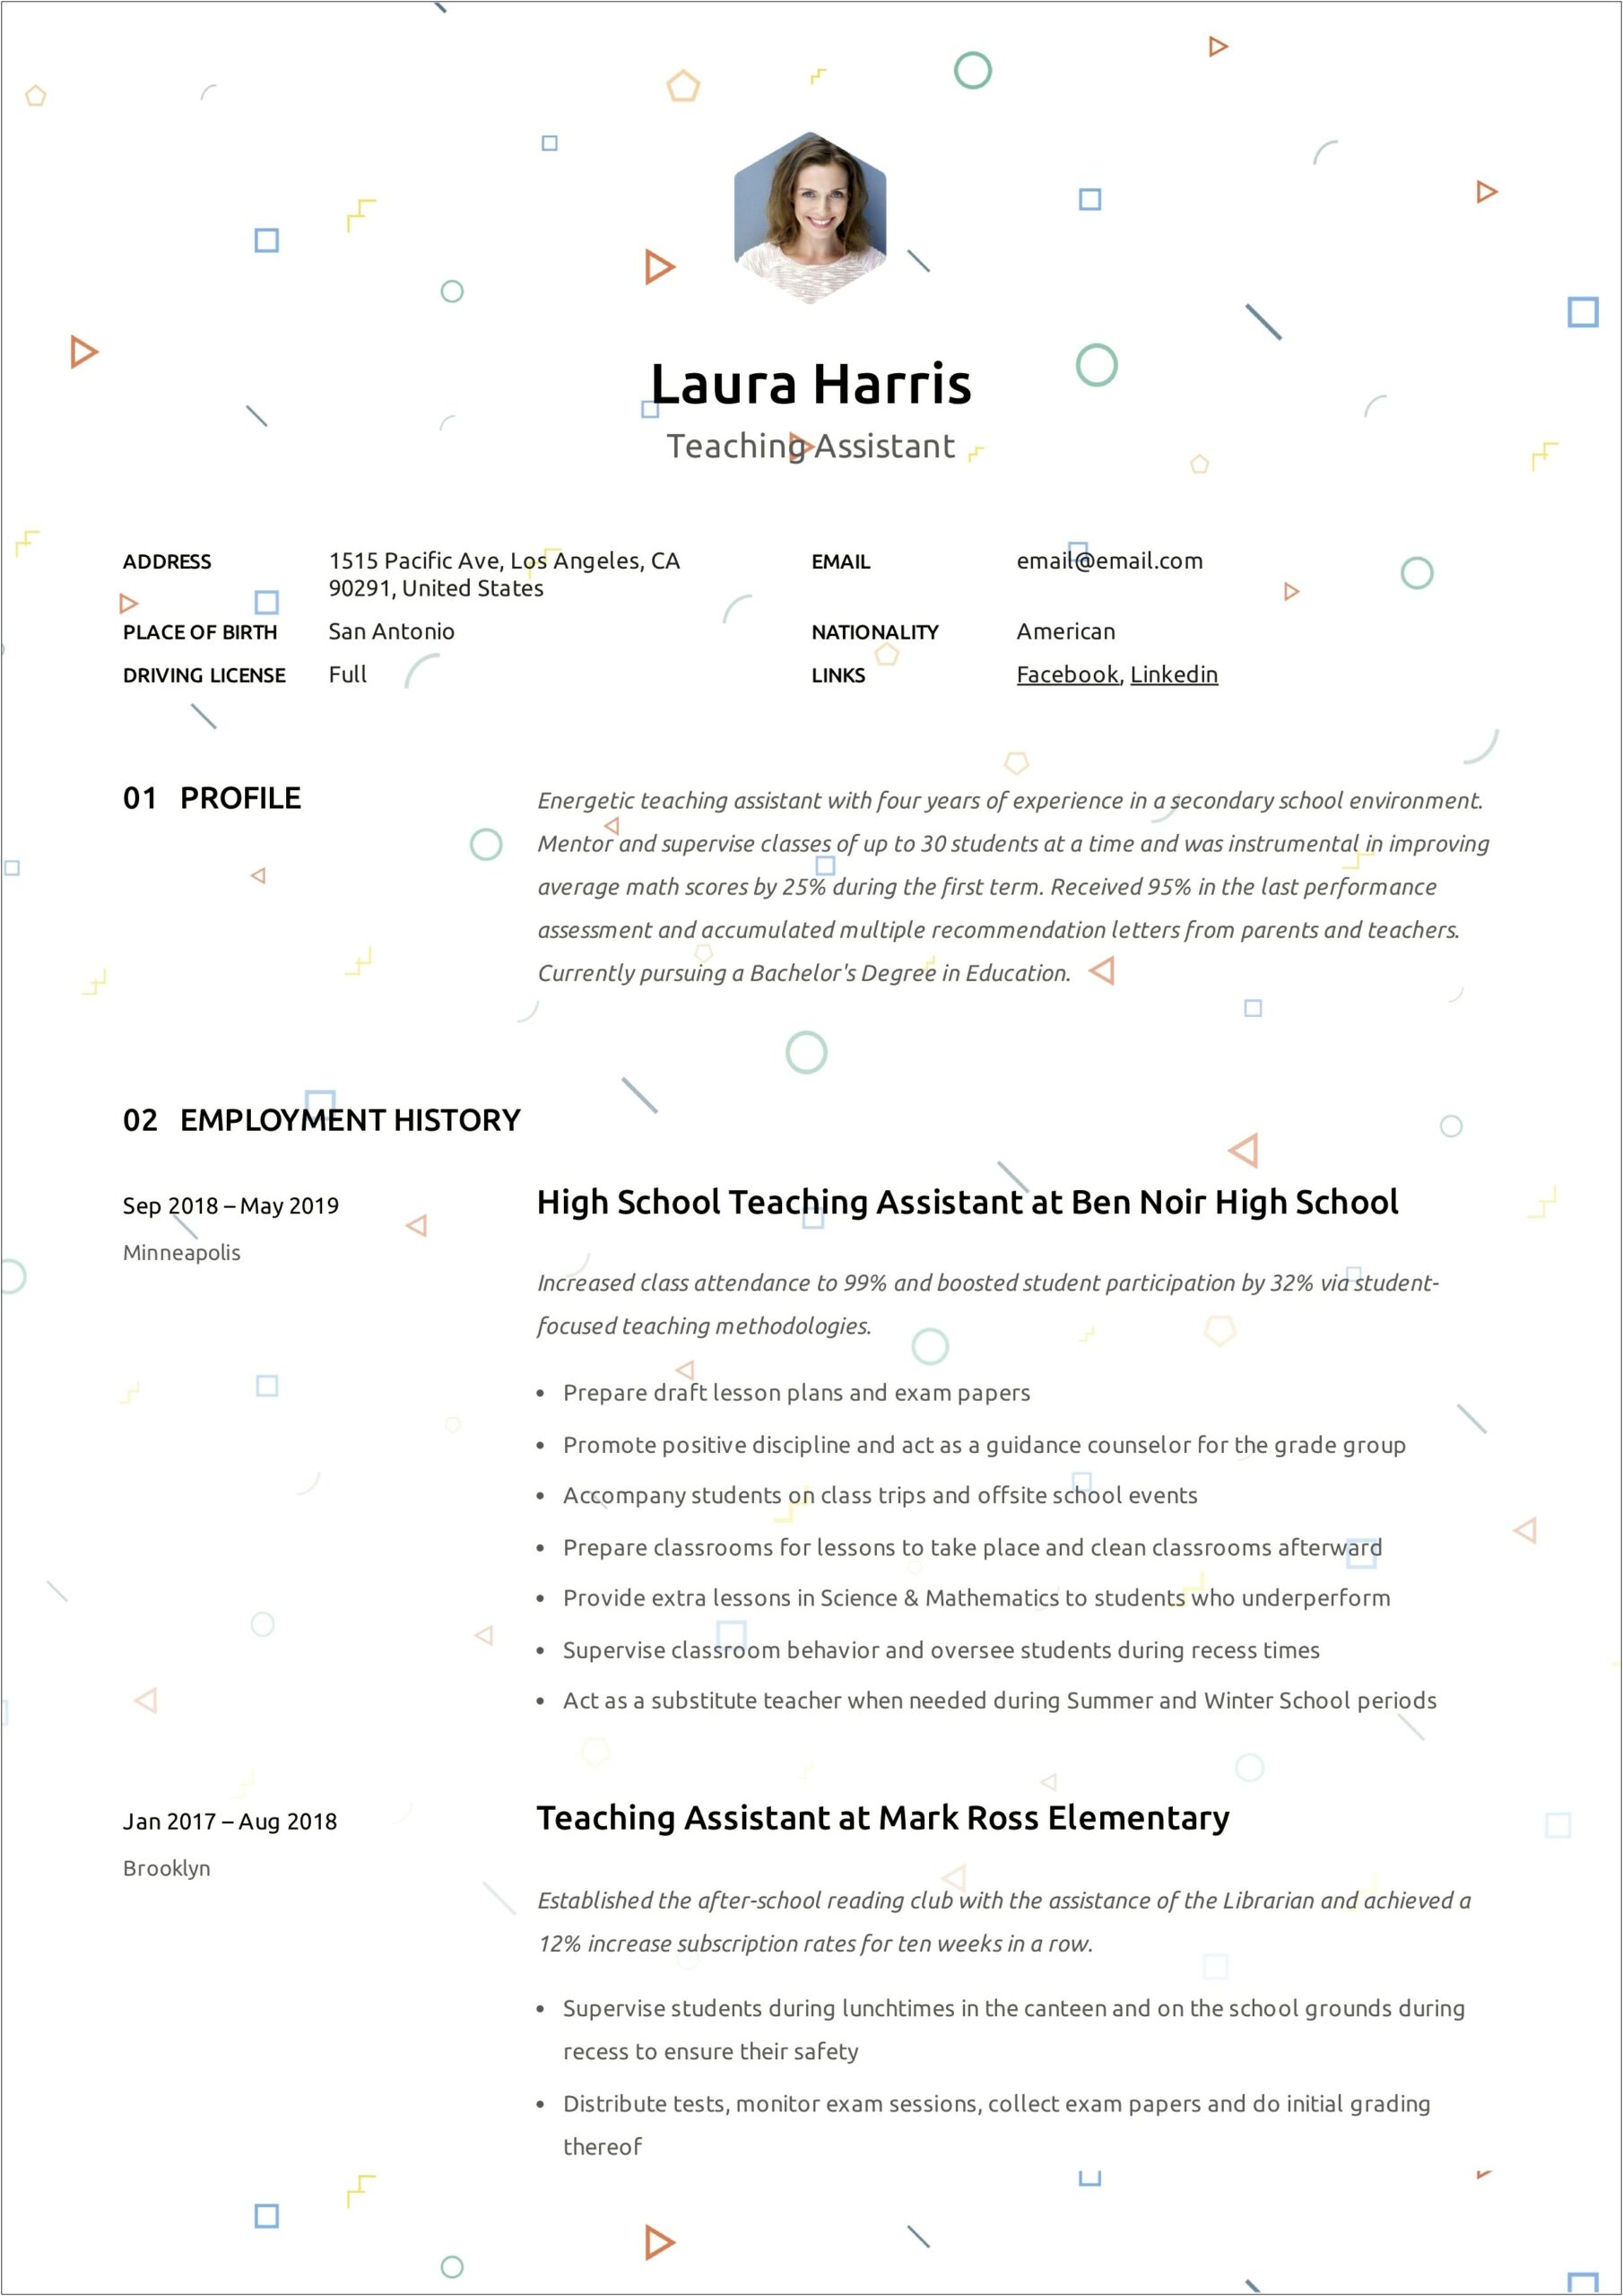 Paraprofessional Resume For High School Student